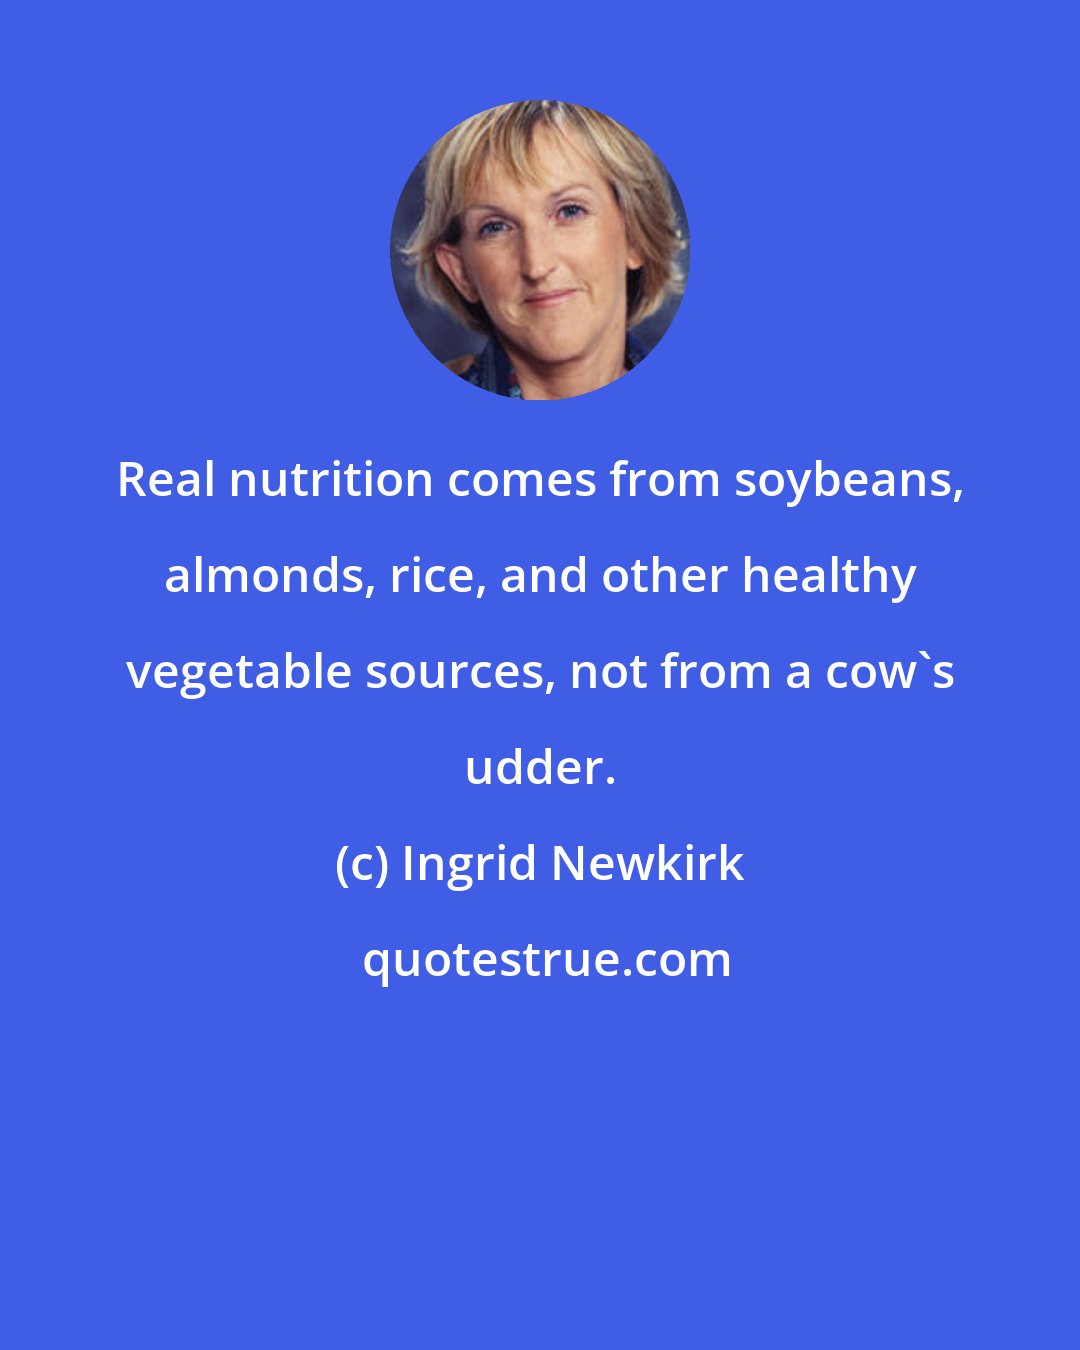 Ingrid Newkirk: Real nutrition comes from soybeans, almonds, rice, and other healthy vegetable sources, not from a cow's udder.